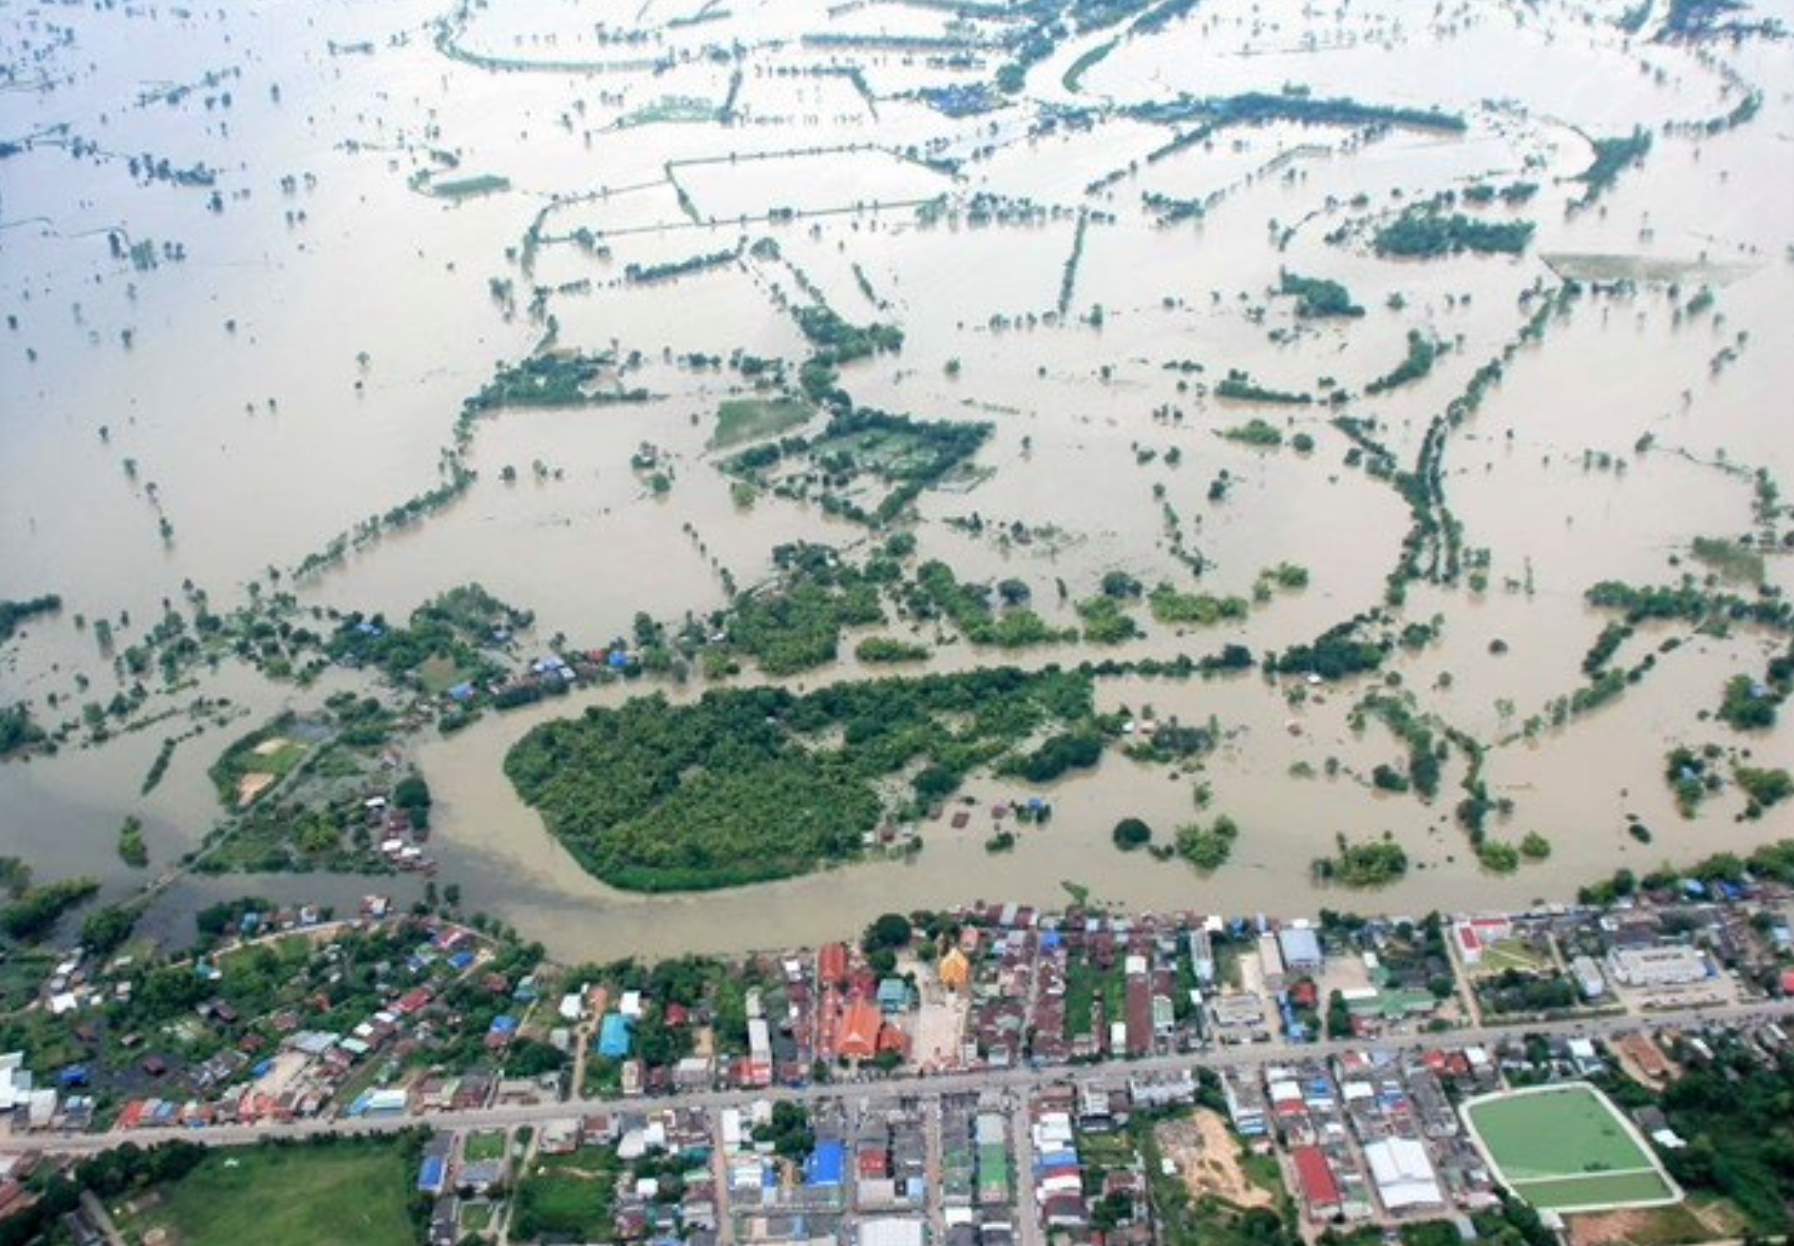 Flood retention areas in the Bang Rakam model prevent flooding along the Yom River from overflowing agricultural zones in the wet season (photo credit: Thai-German Climate Programme – Water)